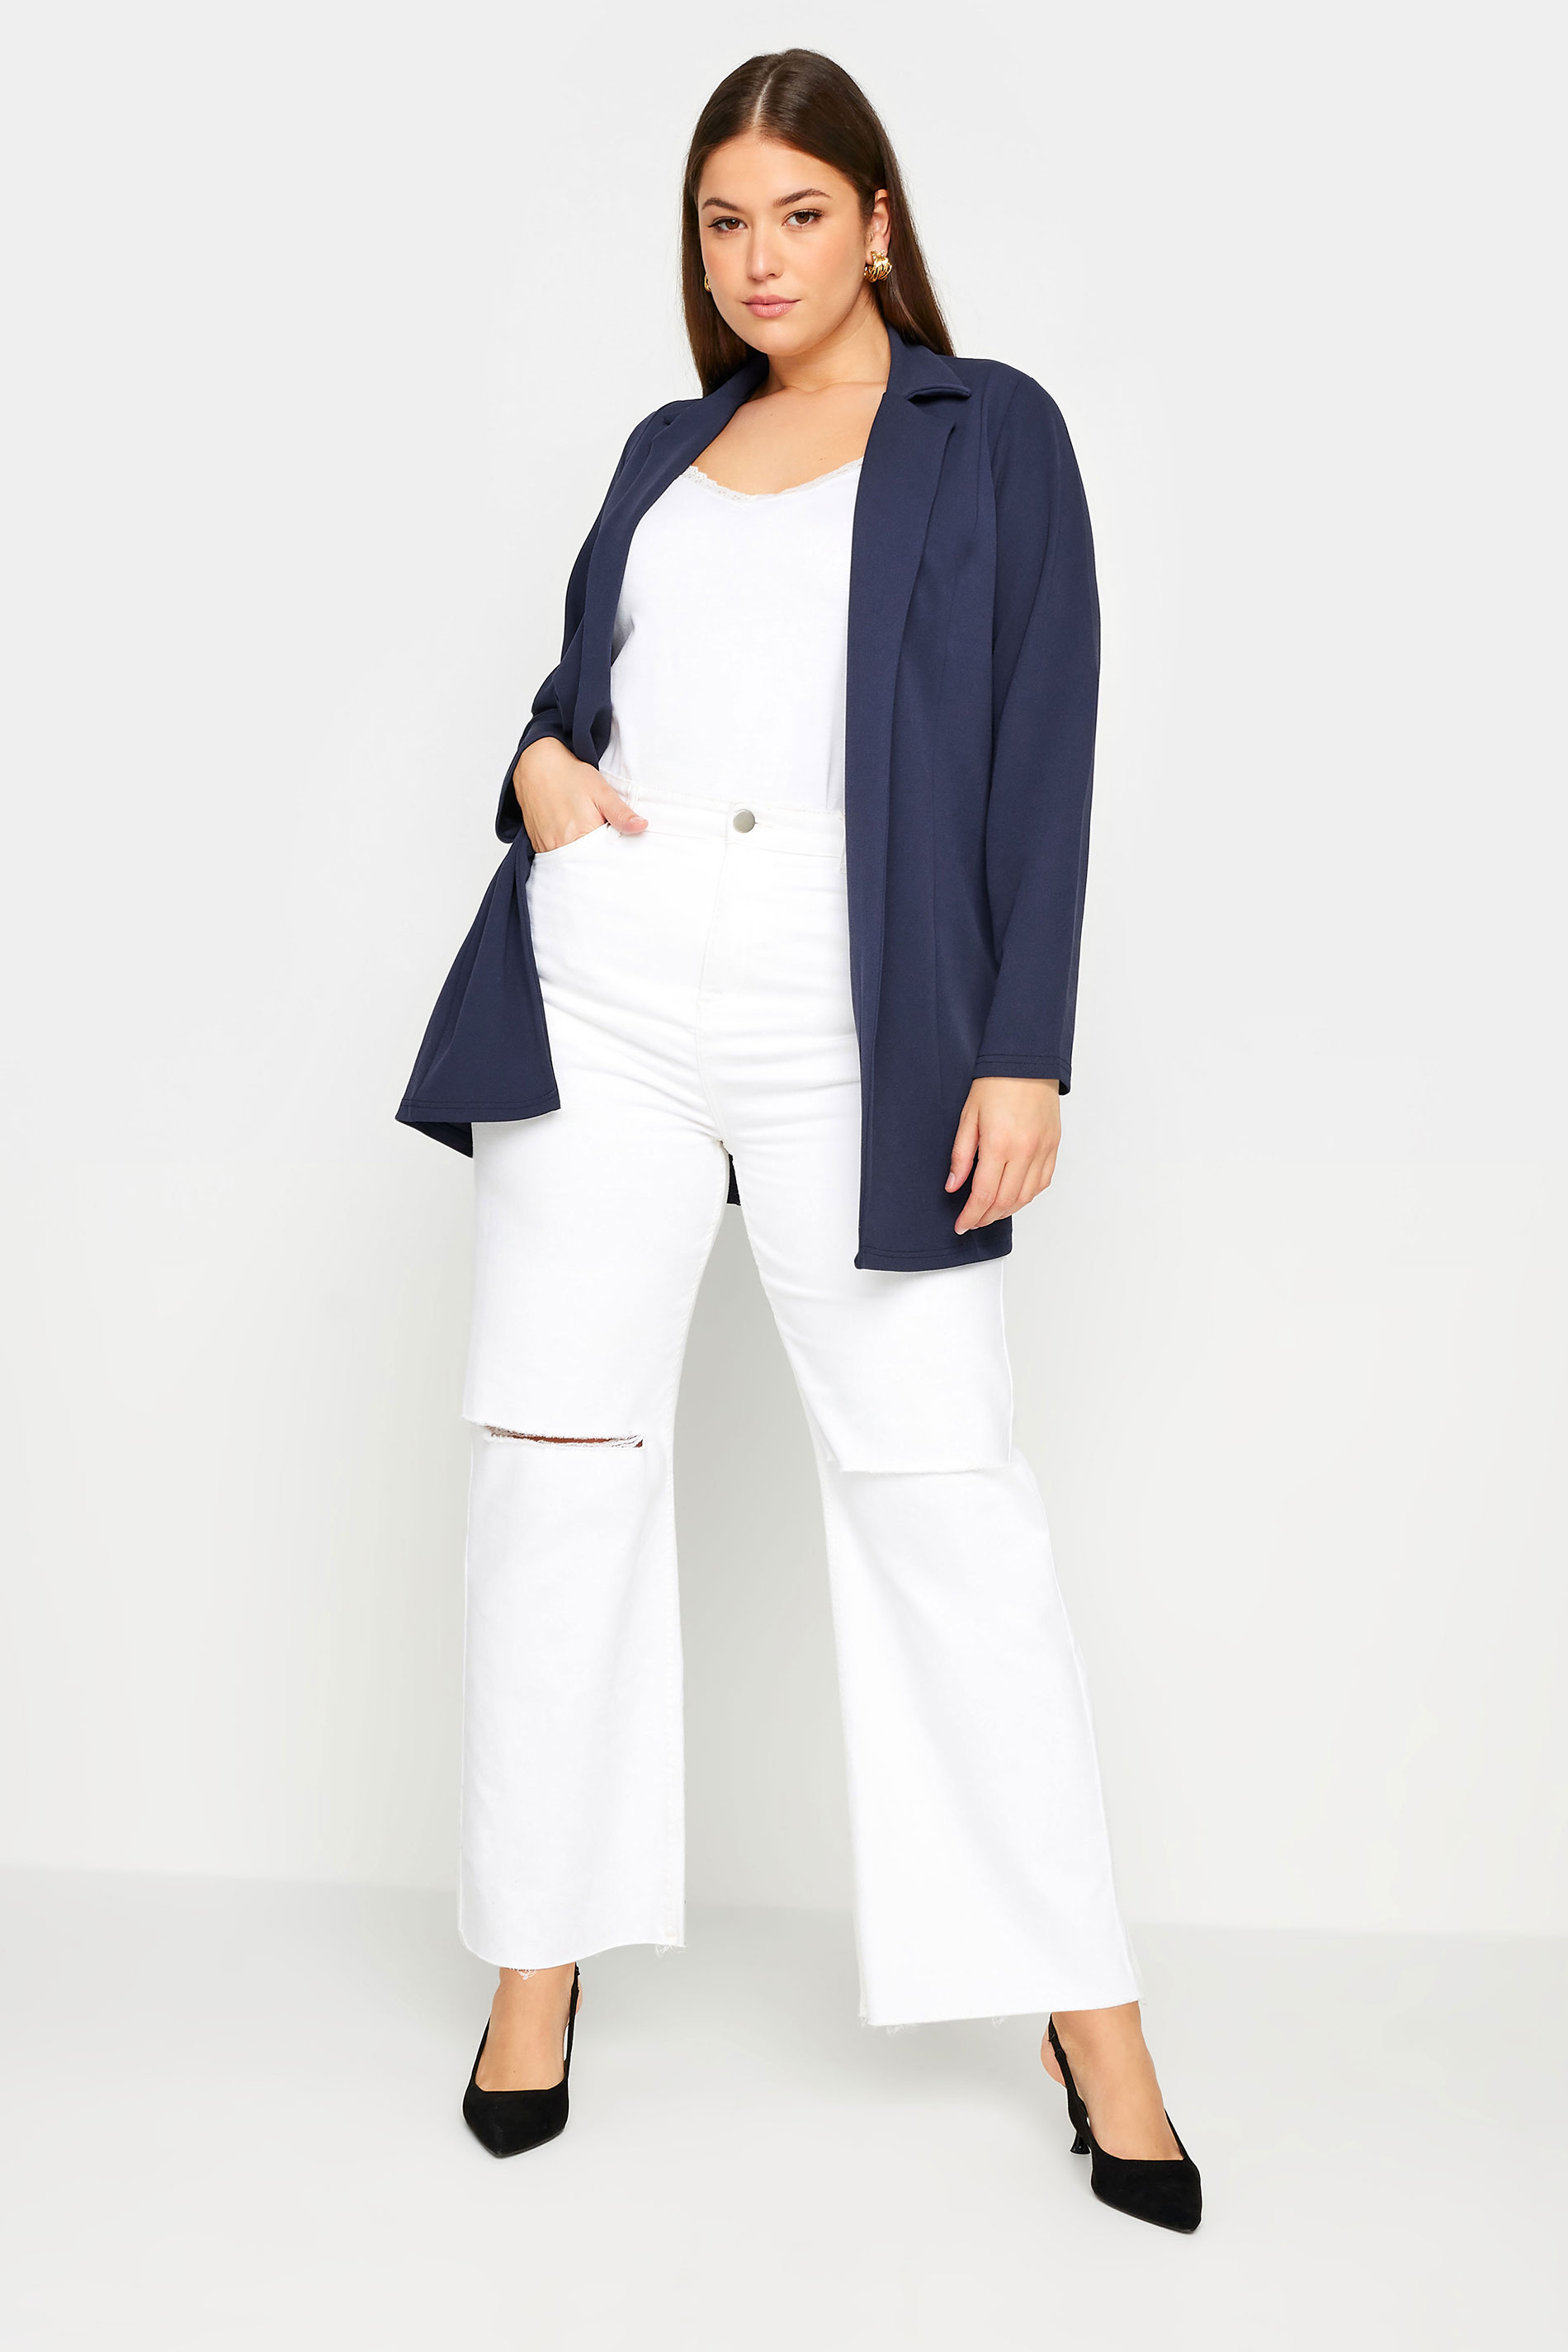 YOURS Plus Size Navy Blue Longline Blazer | Yours Clothing 2